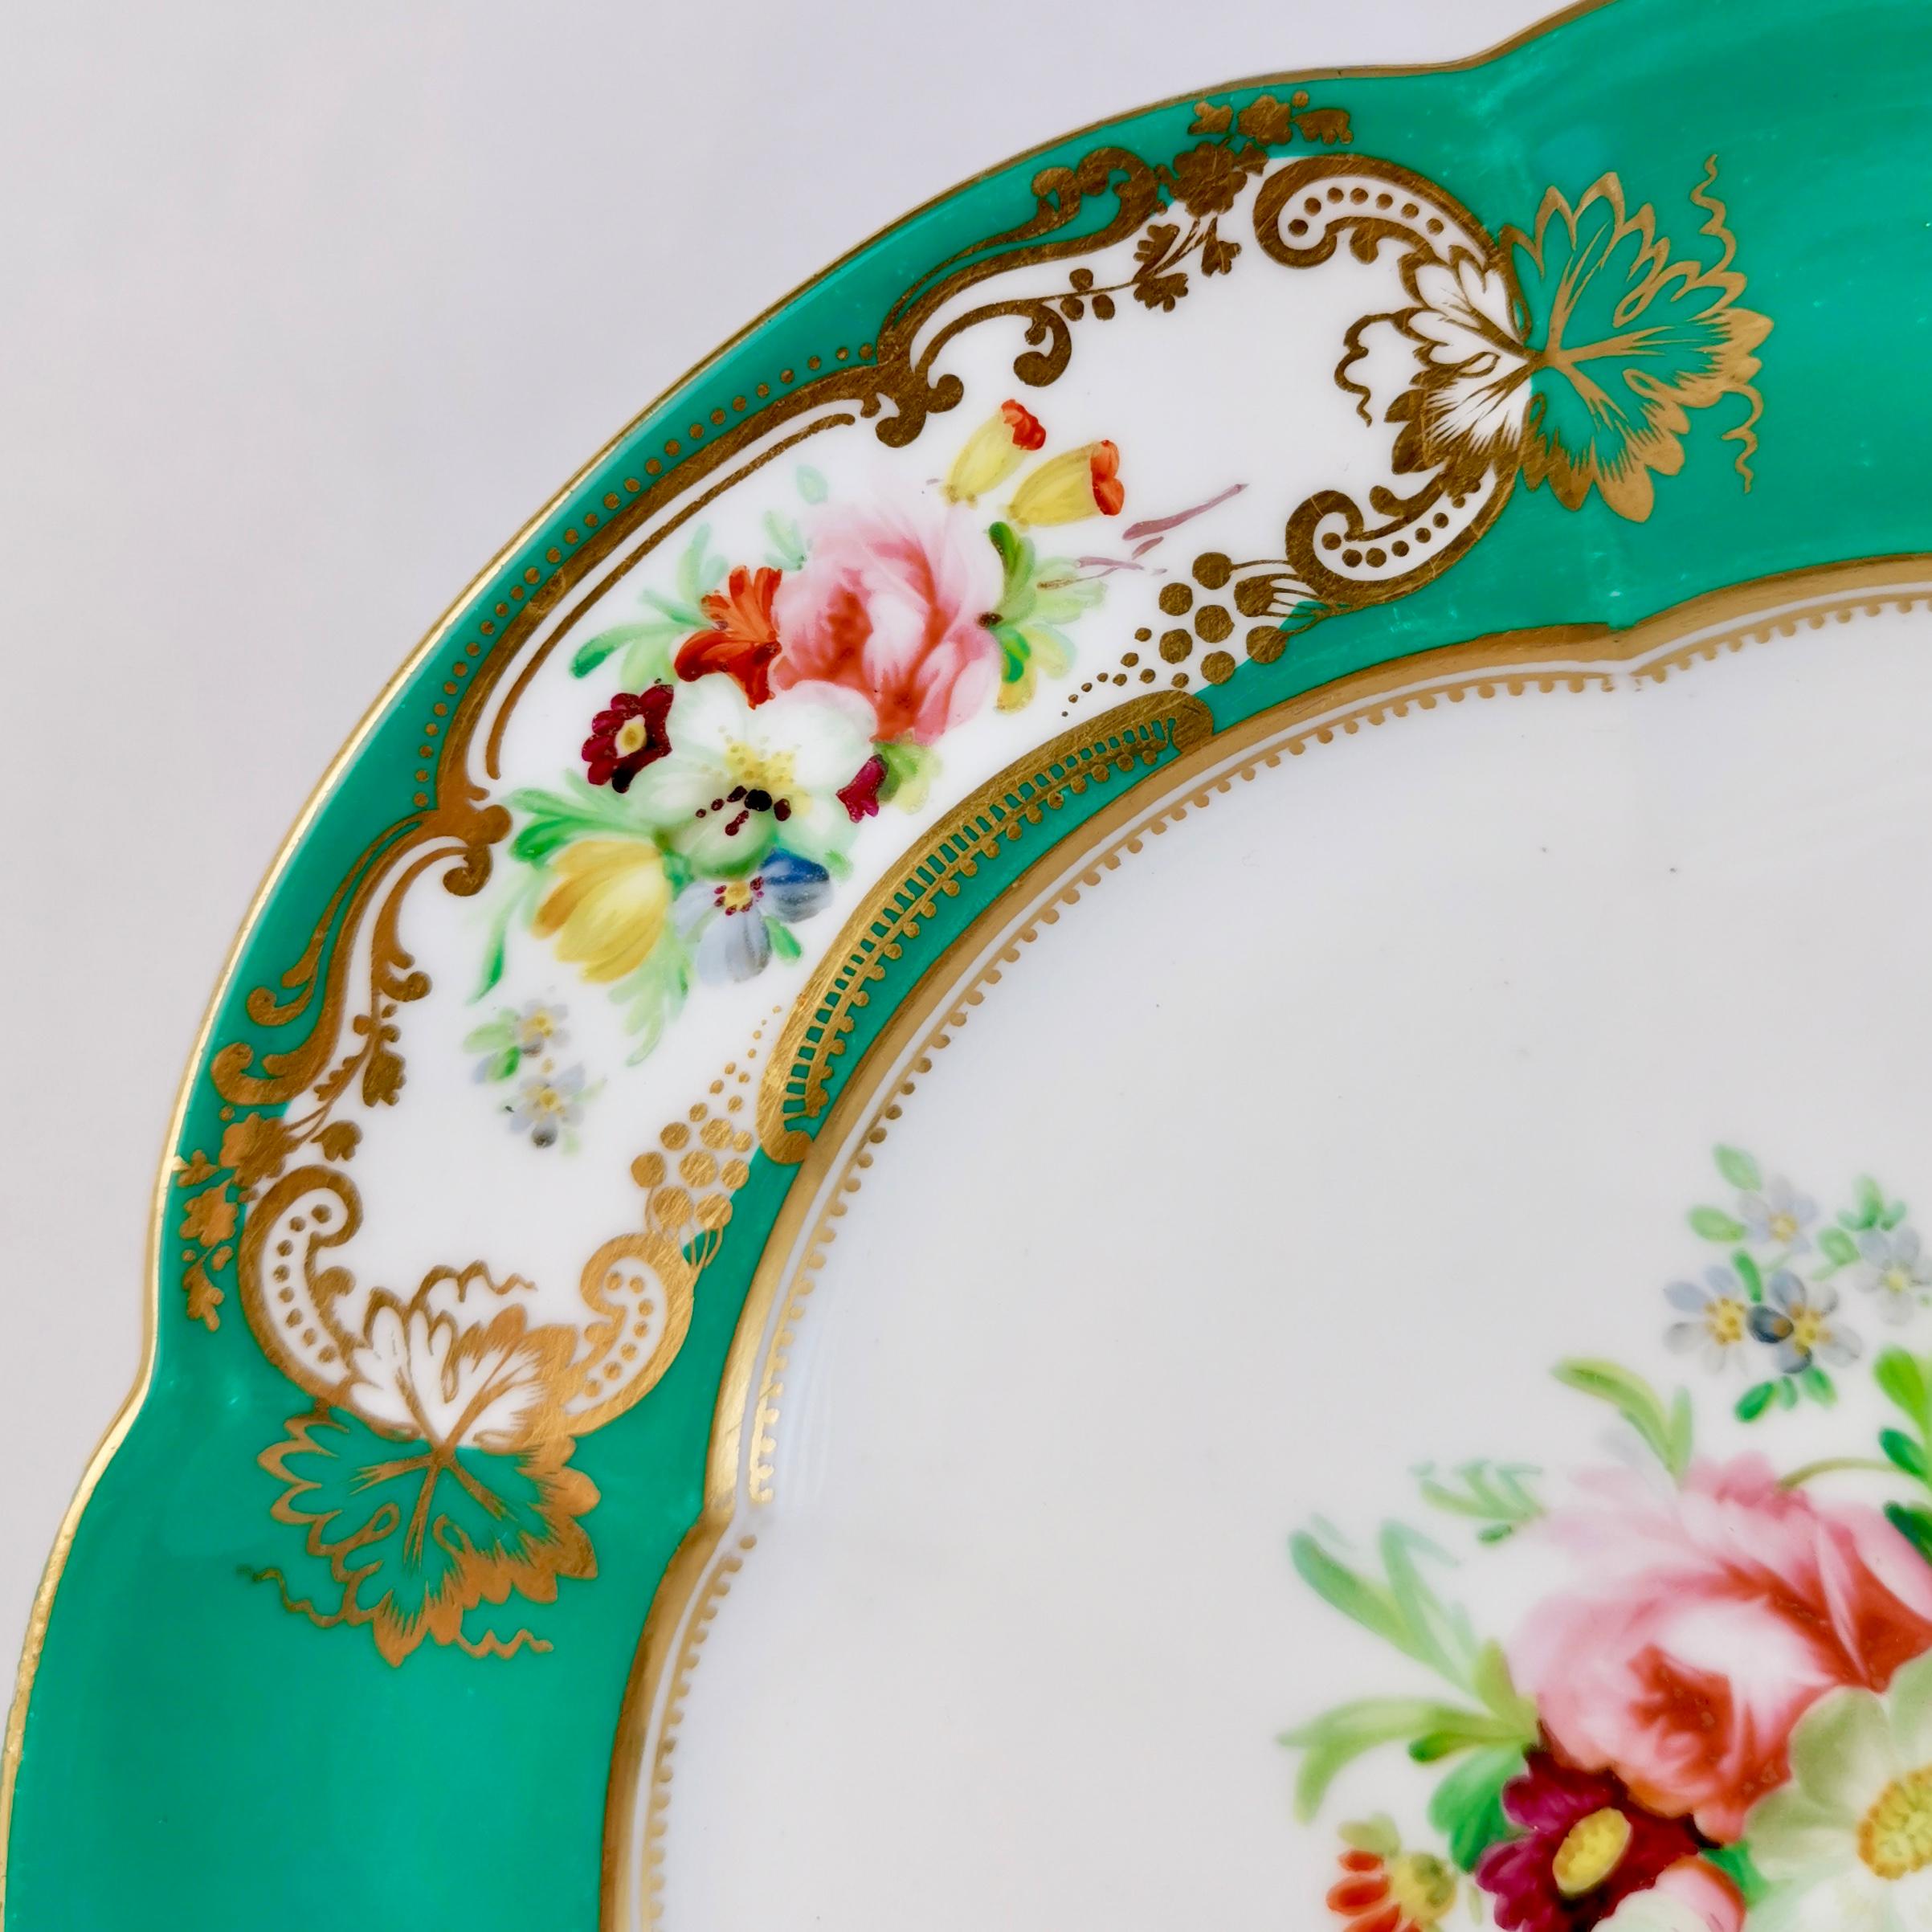 Victorian Coalport Dessert Plate, 6-Lobed Teal with Hand Painted Flowers, circa 1860